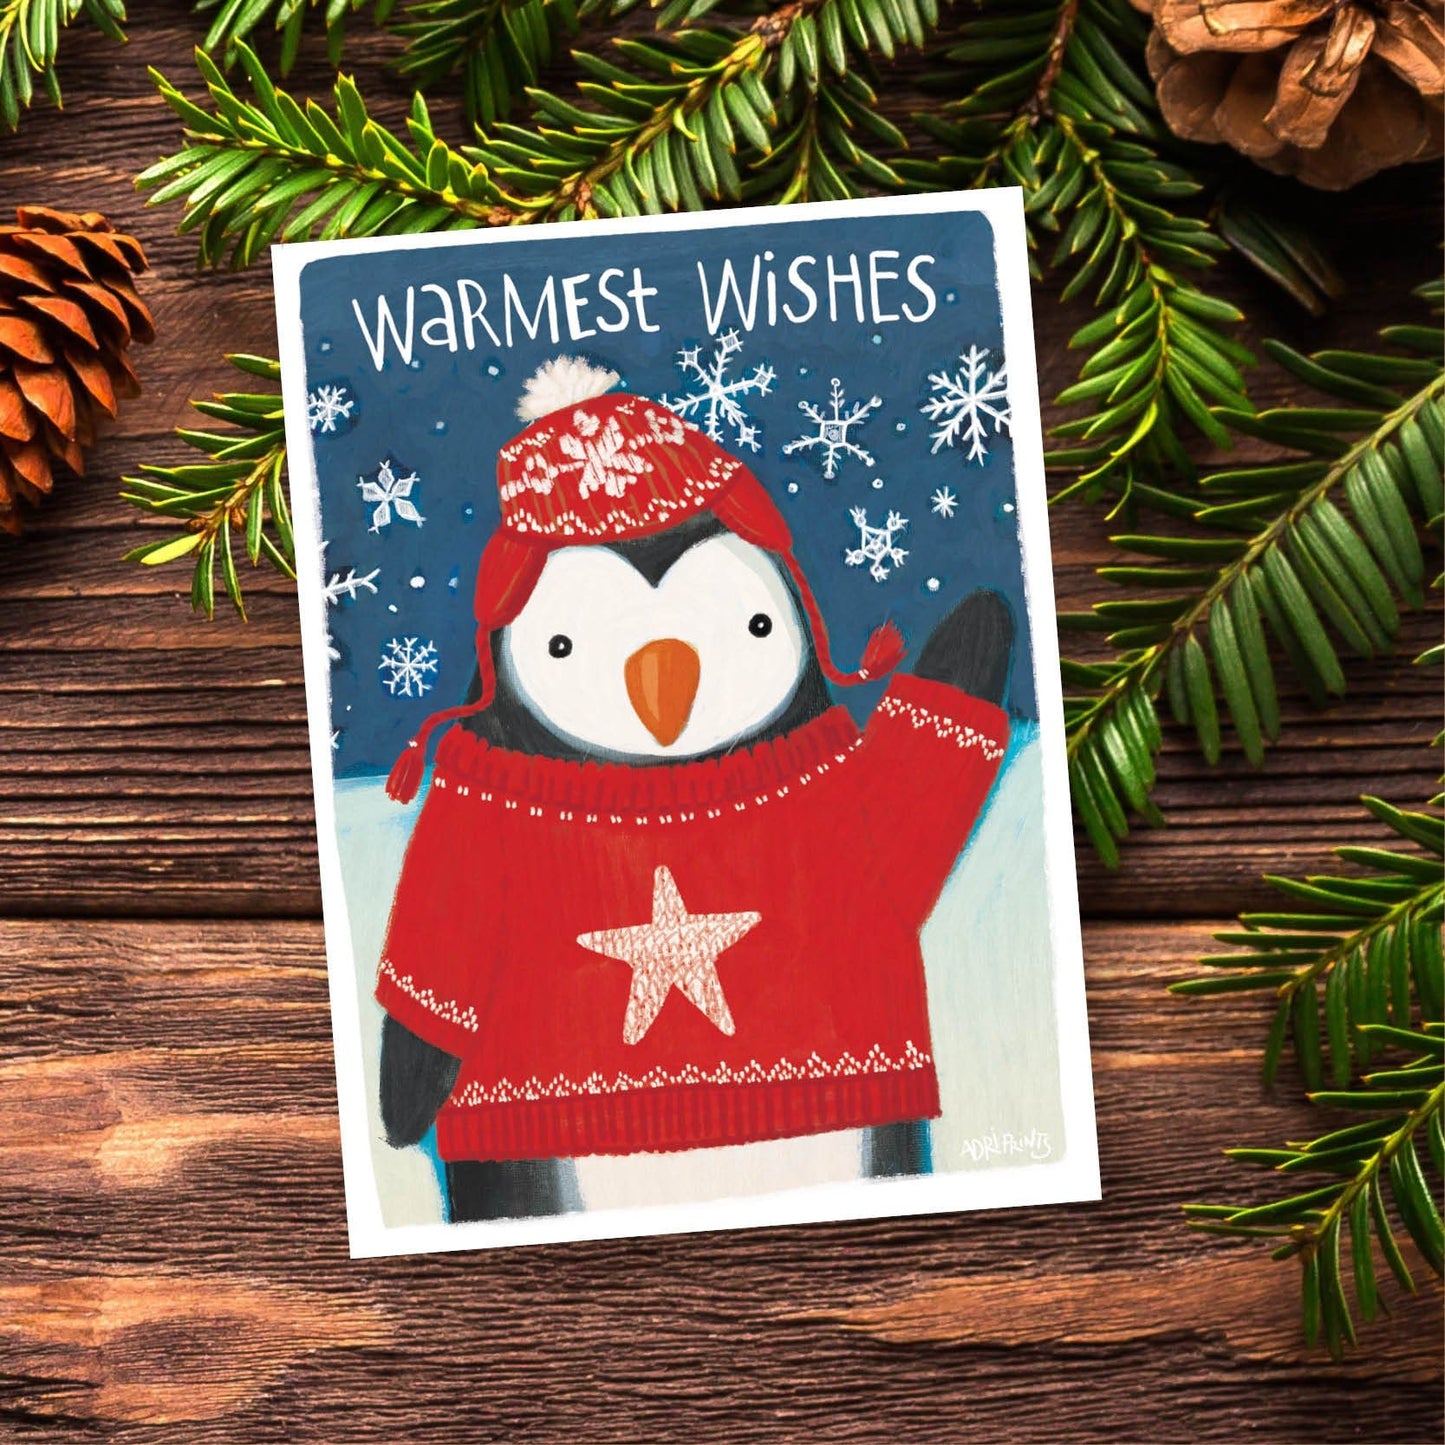 Penguin Warm Wishes, eco-friendly greetings, boxed 10 pack card set, art by Adriana Bergstrom